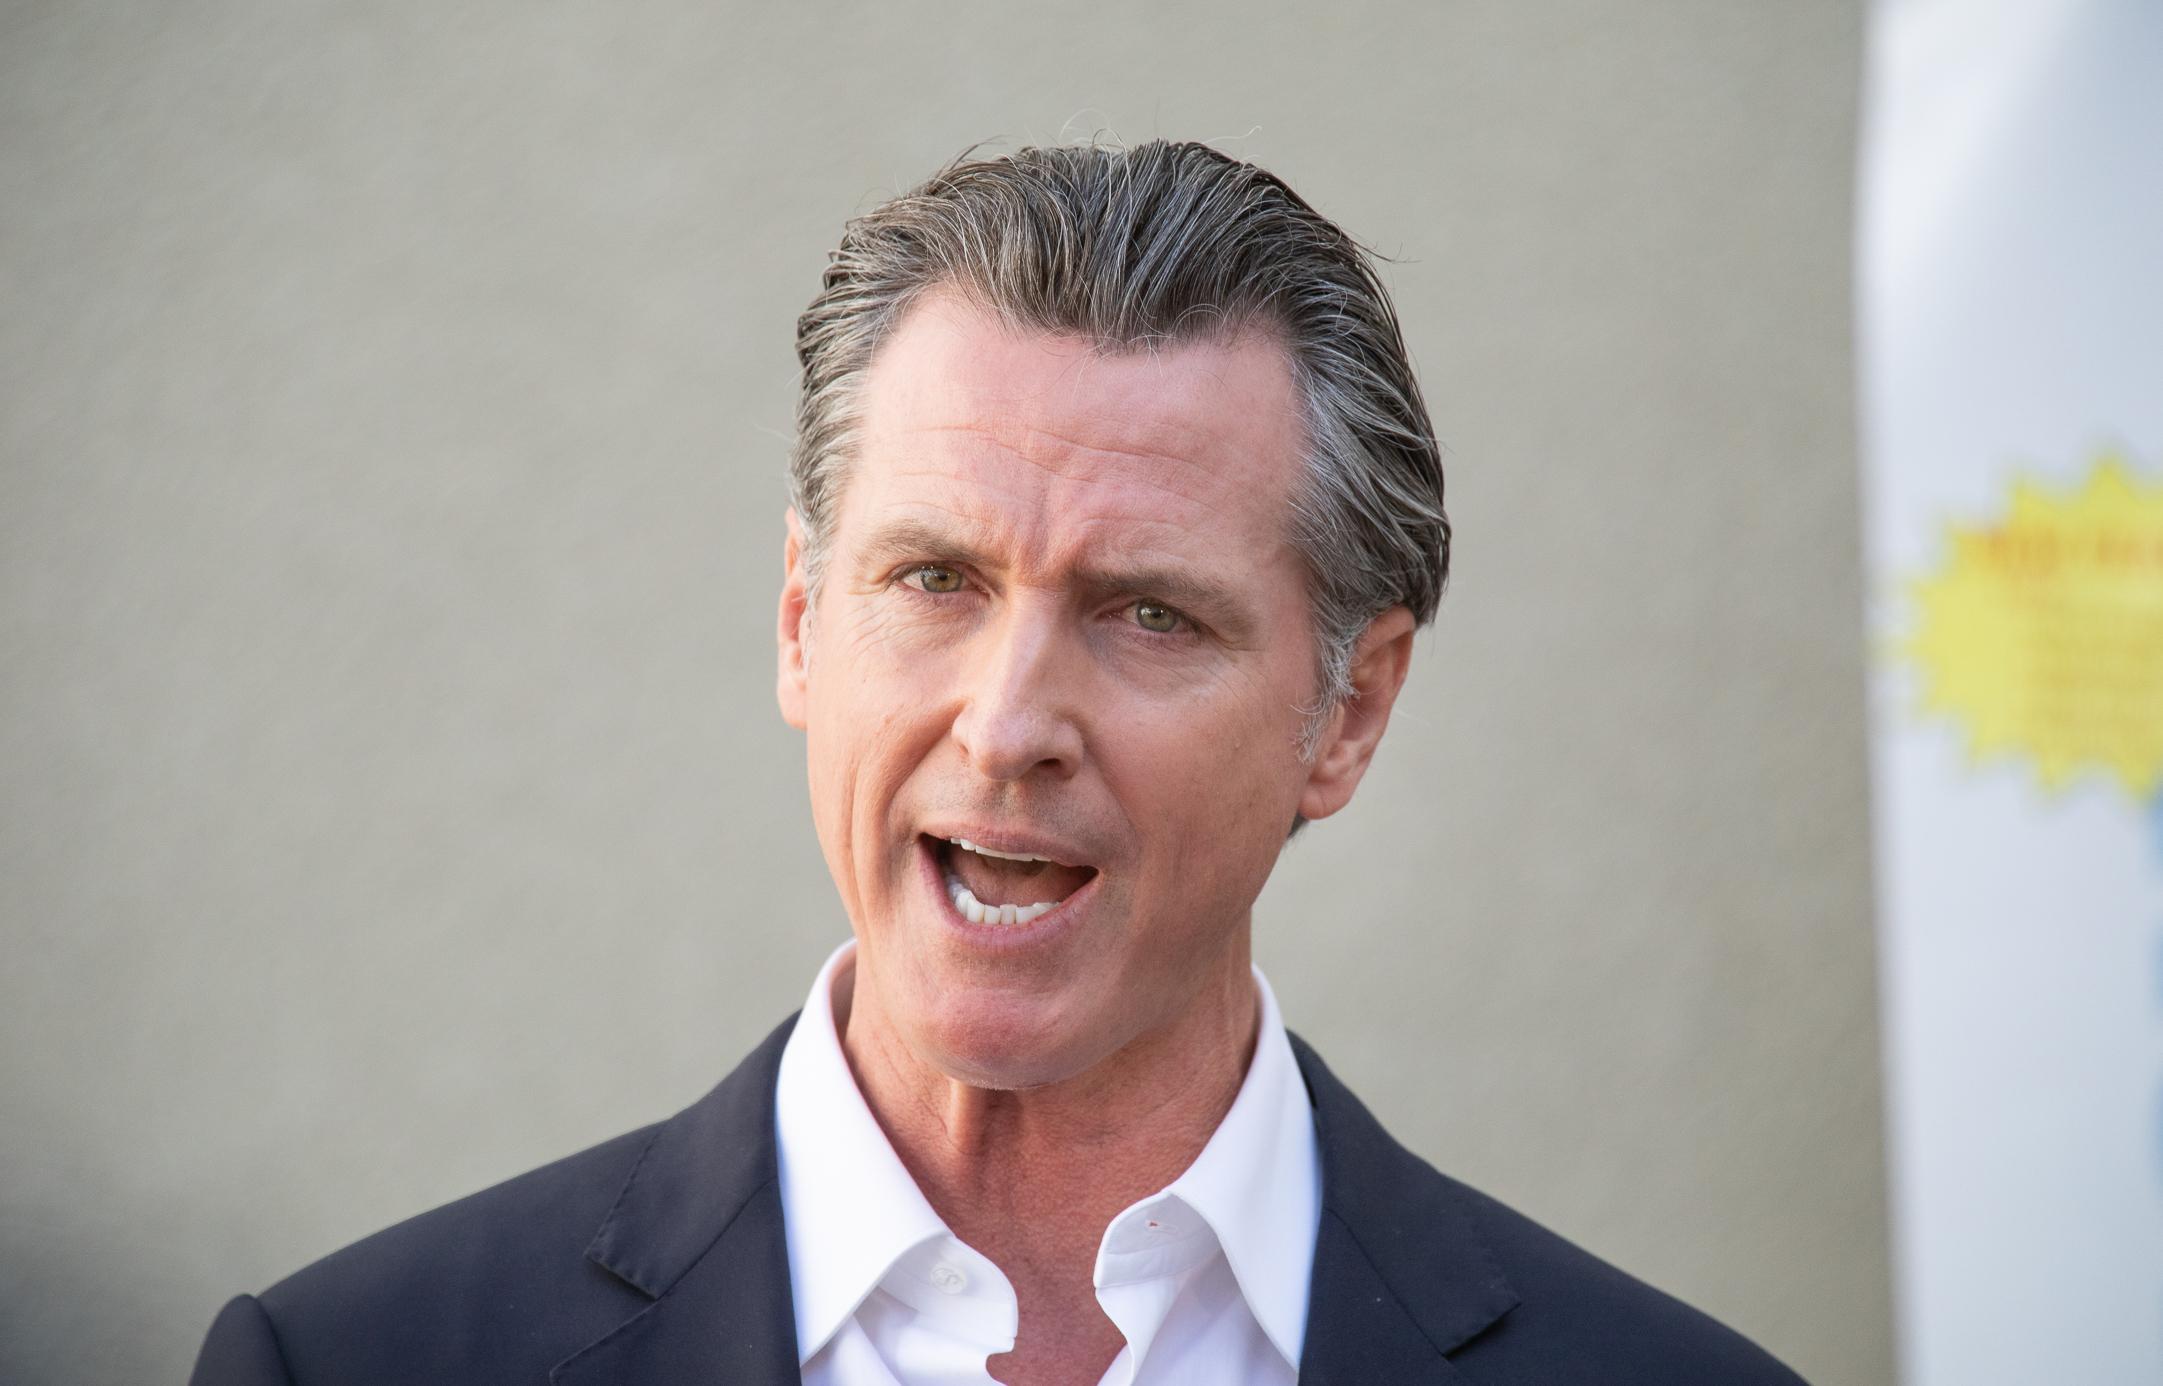 Gov. Newsom Says He ‘Will Not Sign’ Youth Tackle Football Ban Bill